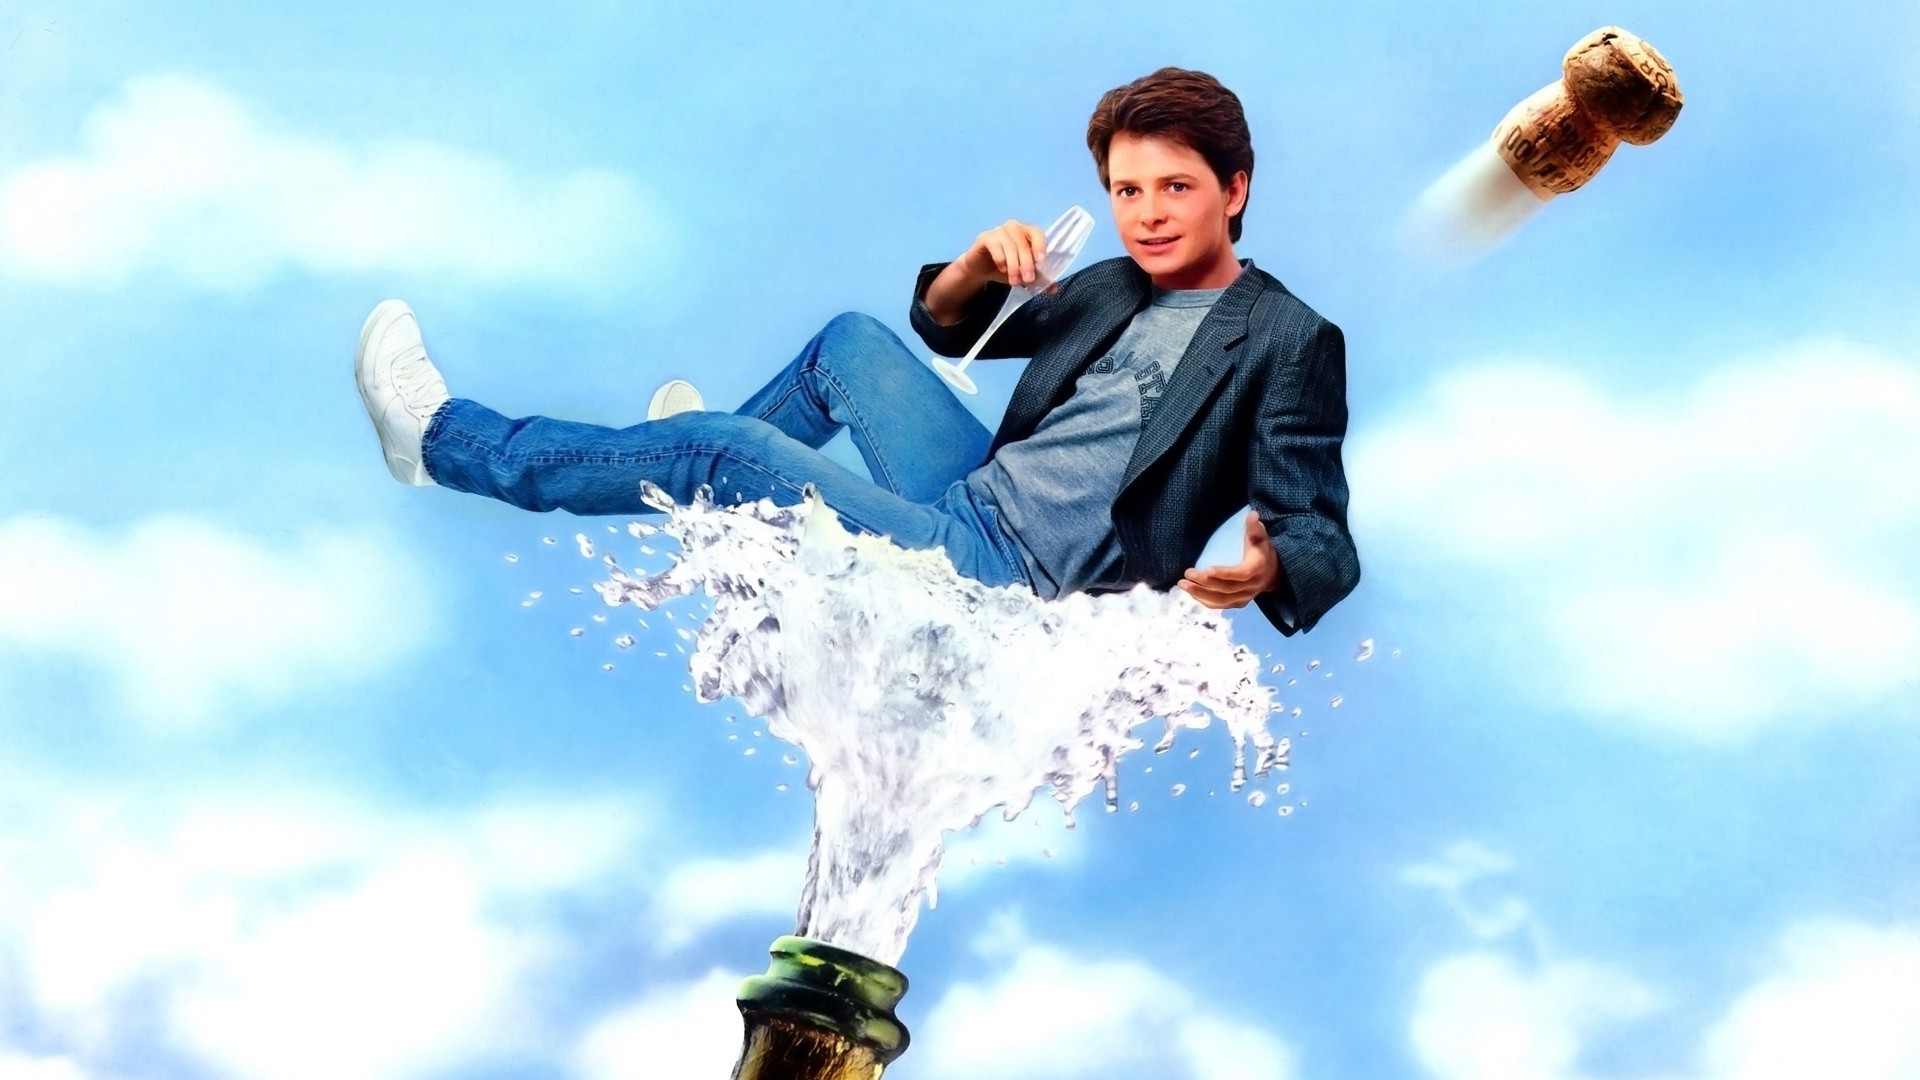 20 Michael J Fox HD Wallpapers and Backgrounds